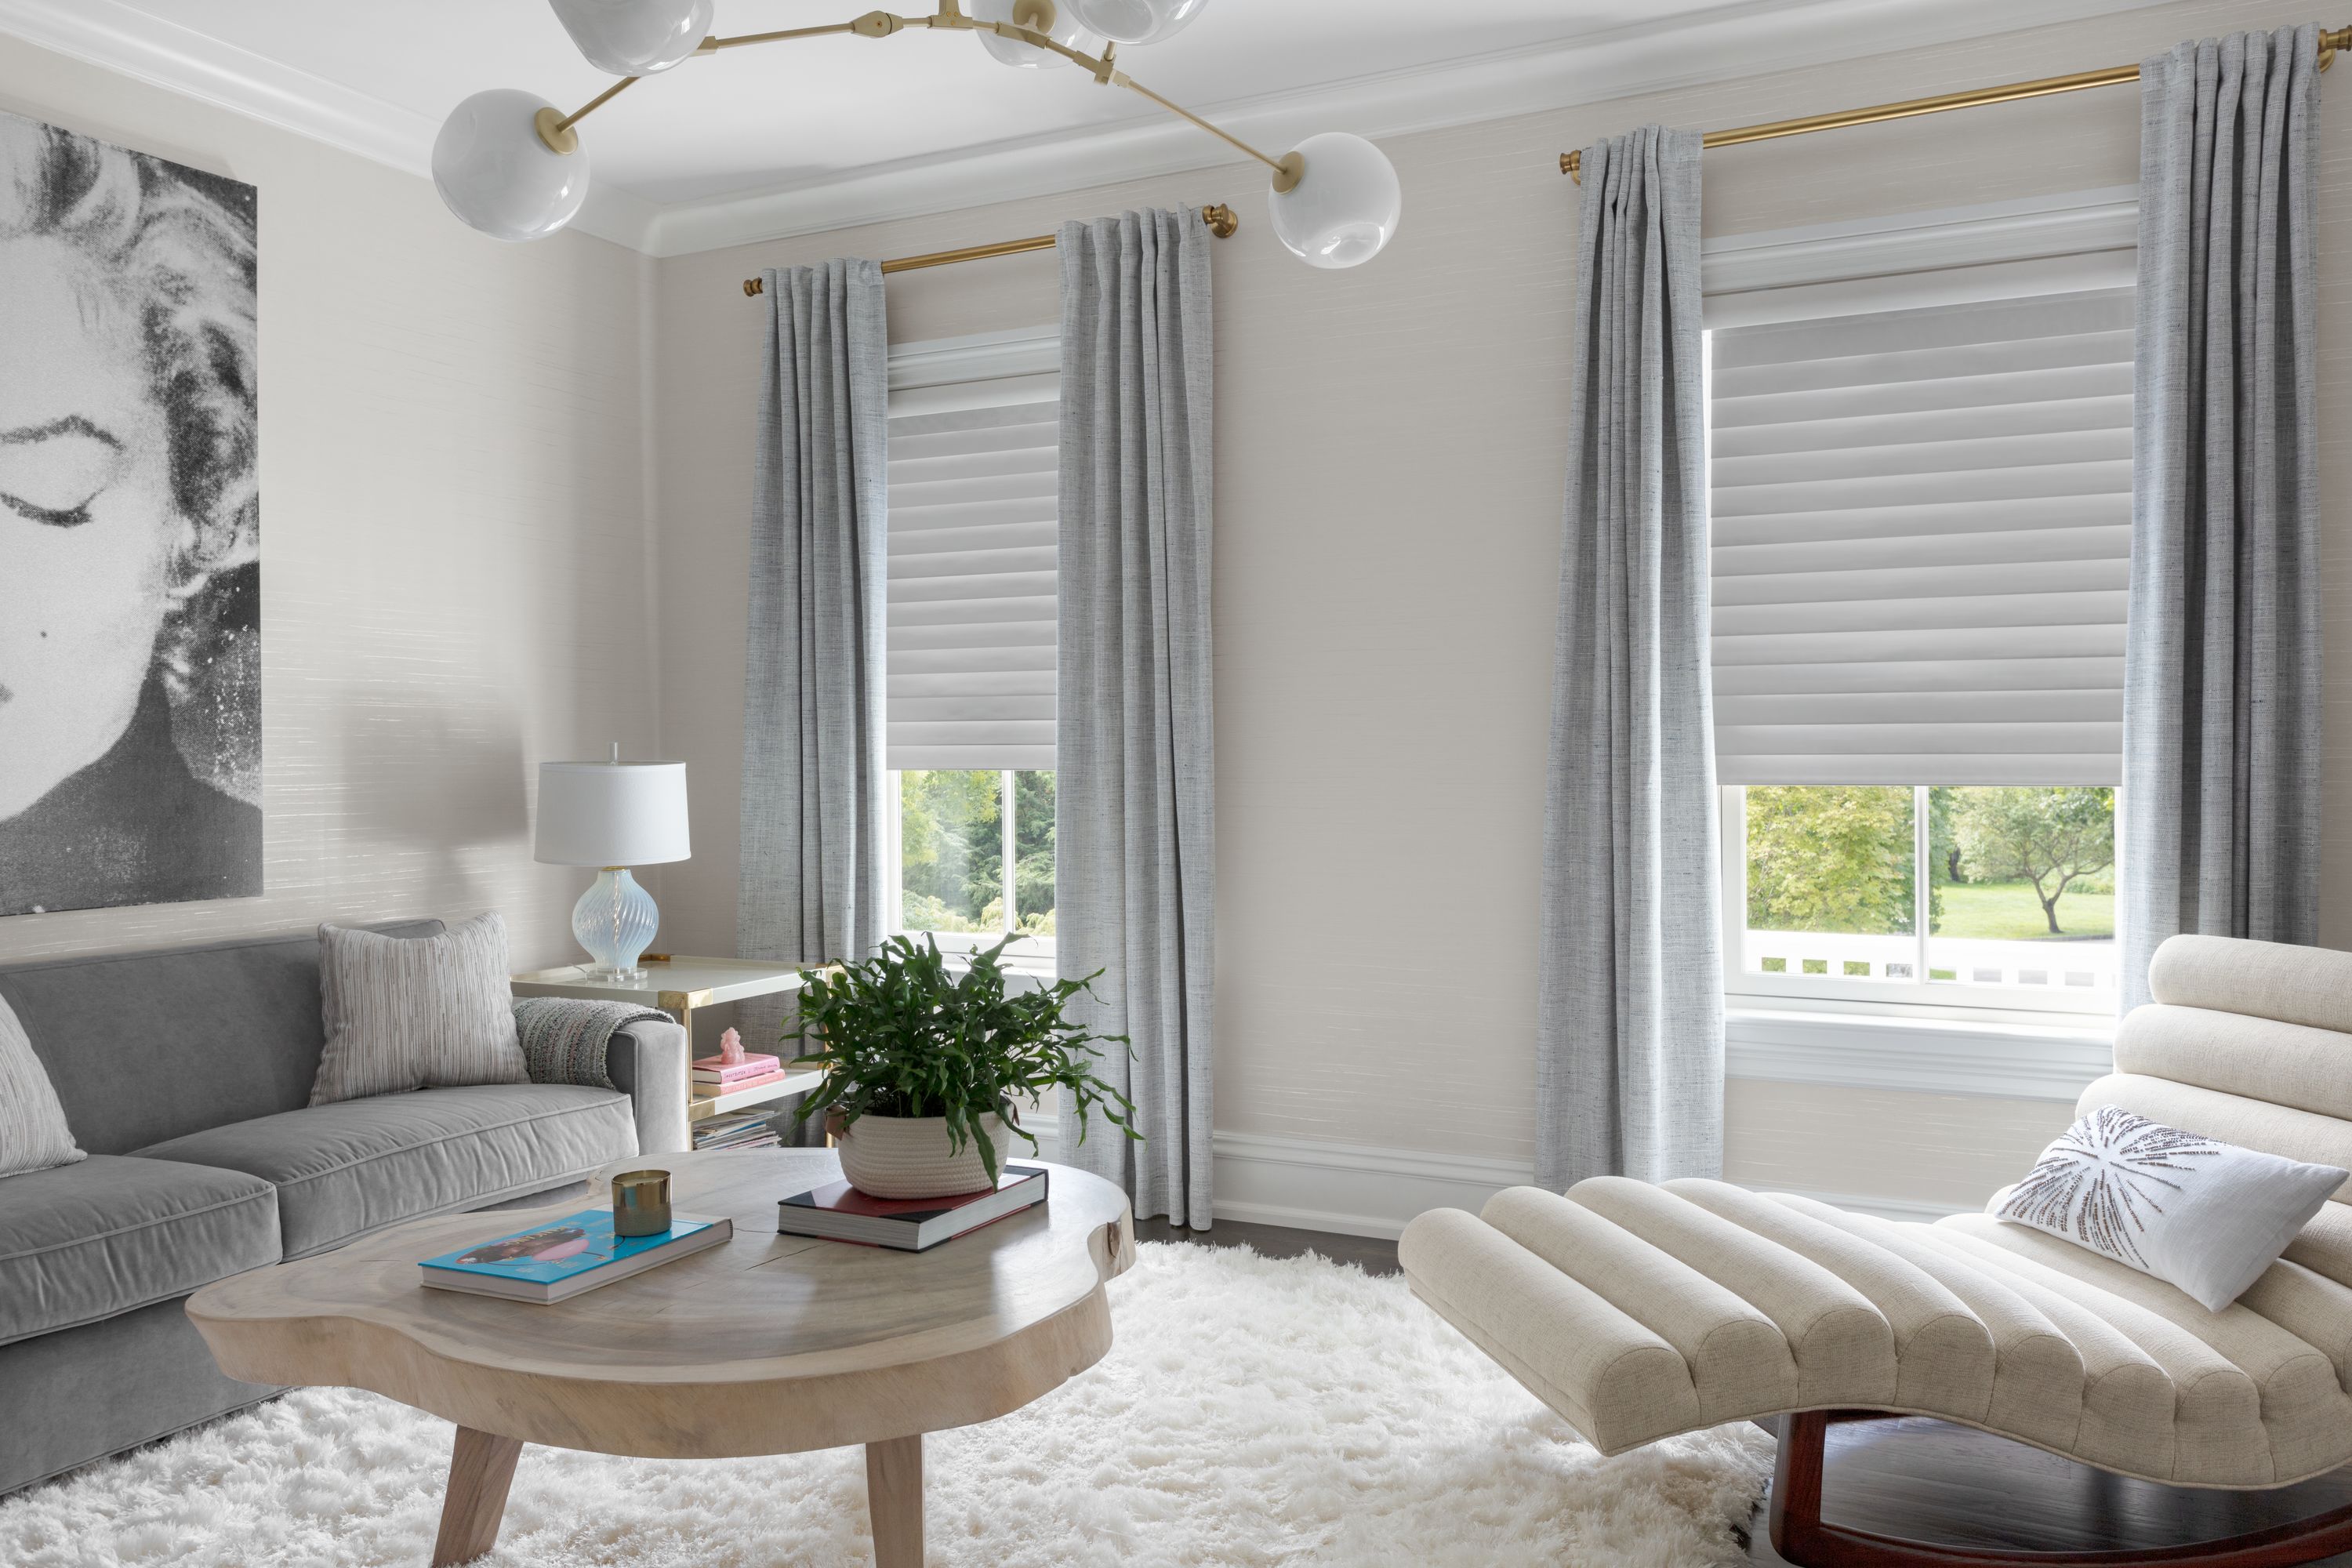 In a living area, White Dove Serenity sheer shades are complemented with gorgeous curtains on a brass rod.